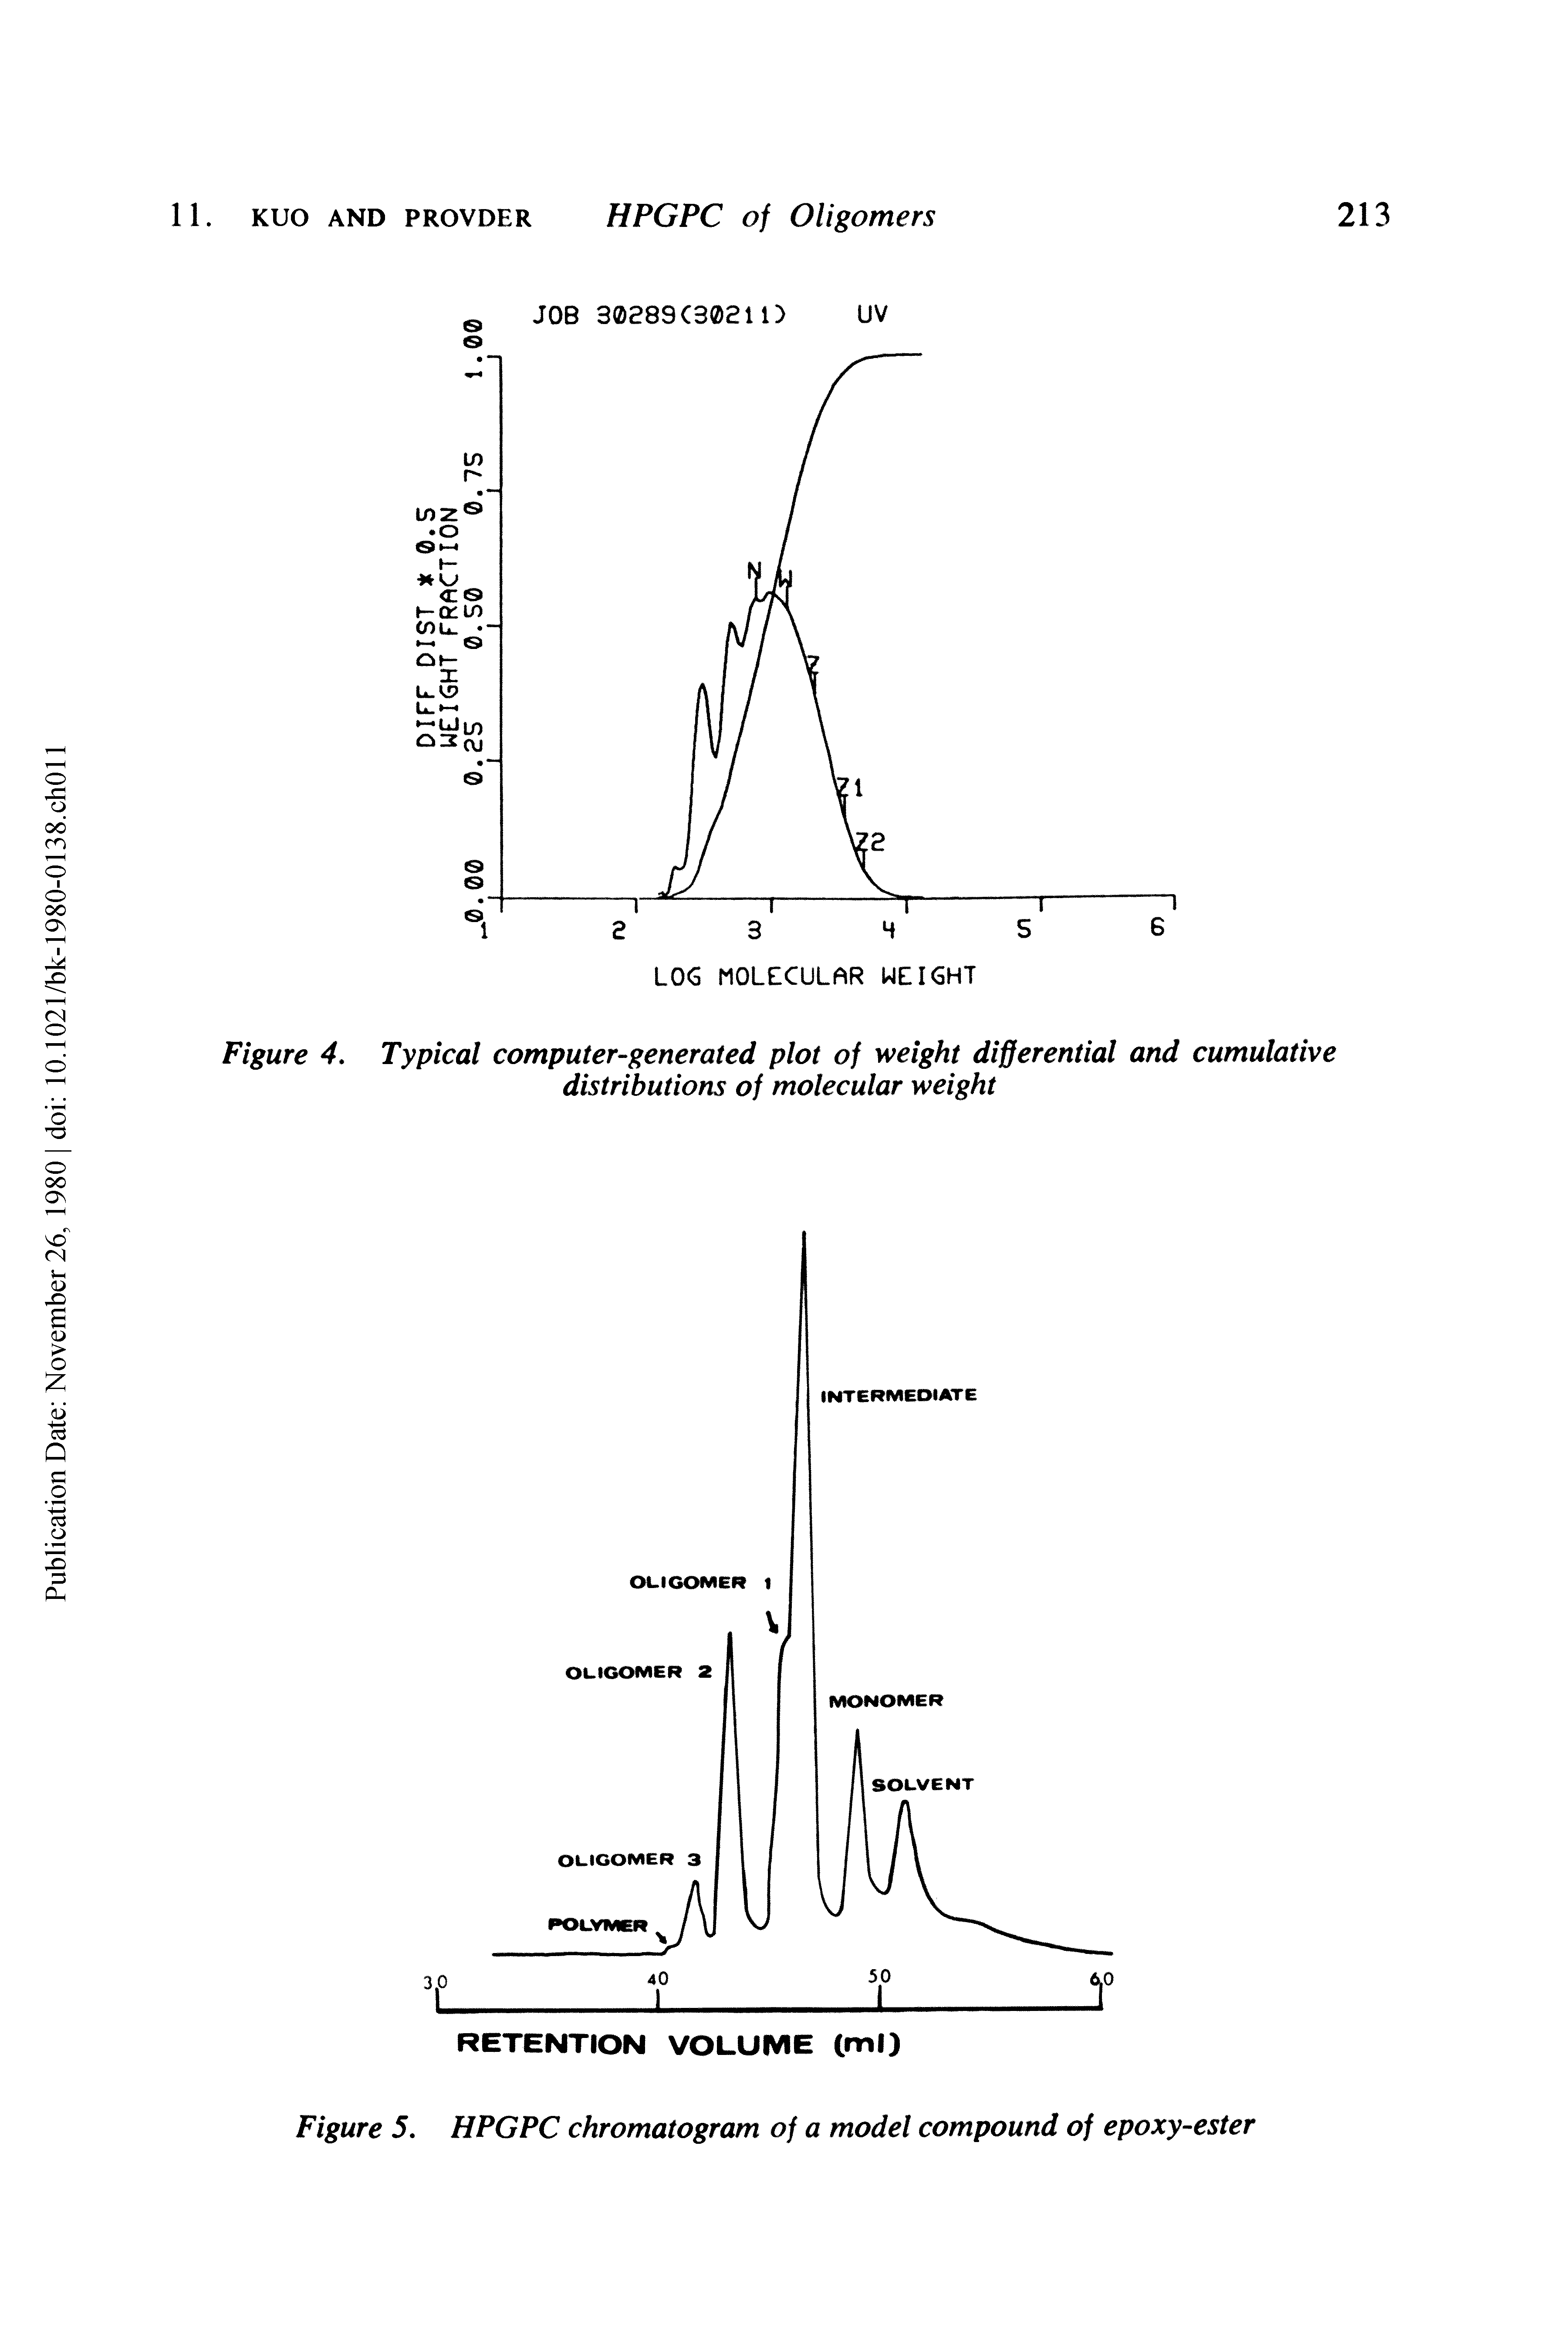 Figure 4. Typical computer-generated plot of weight differential and cumulative distributions of molecular weight...